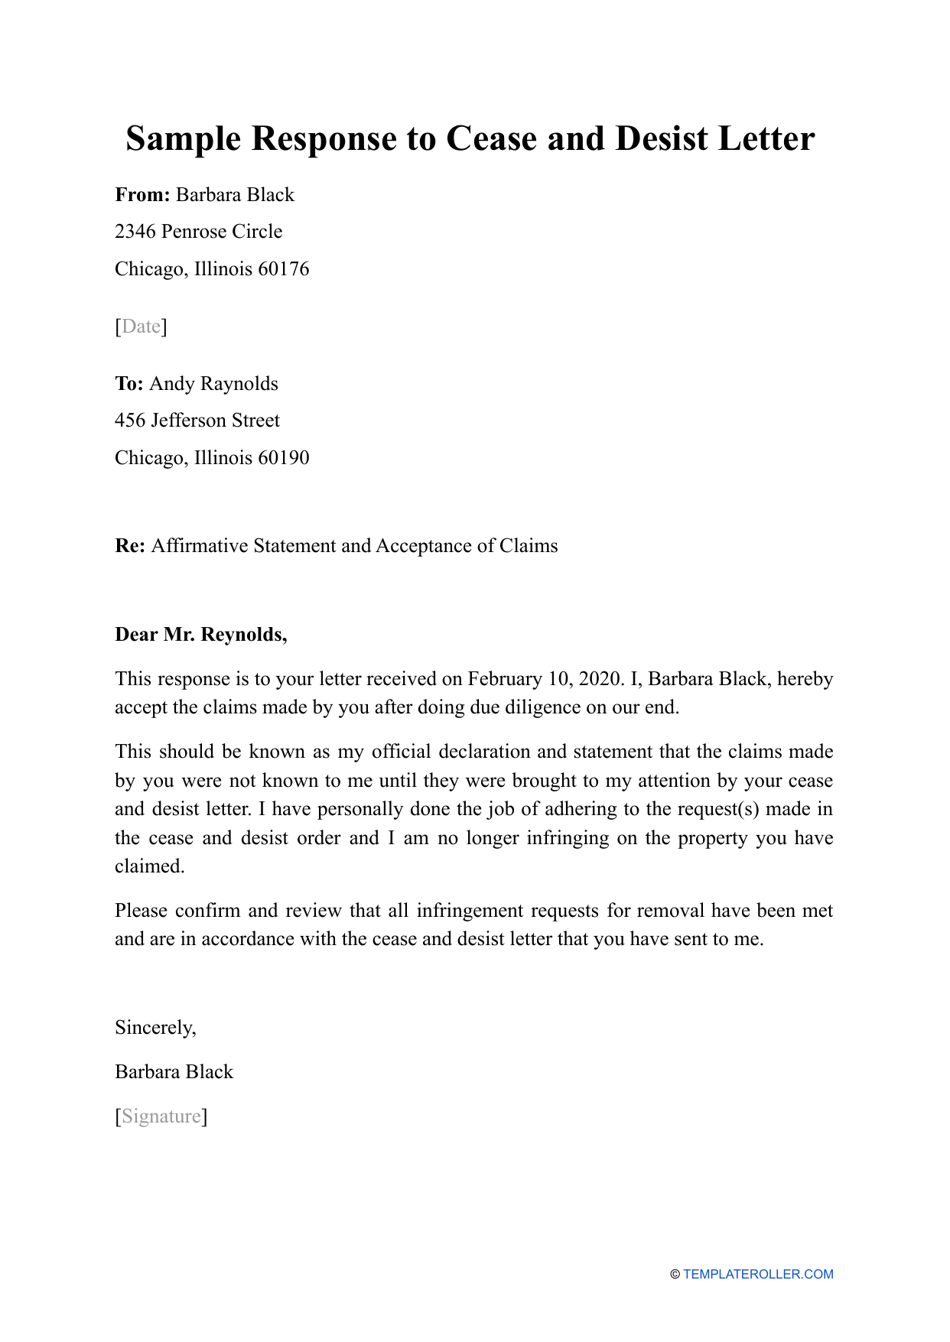 sample-response-to-cease-and-desist-letter-download-printable-pdf